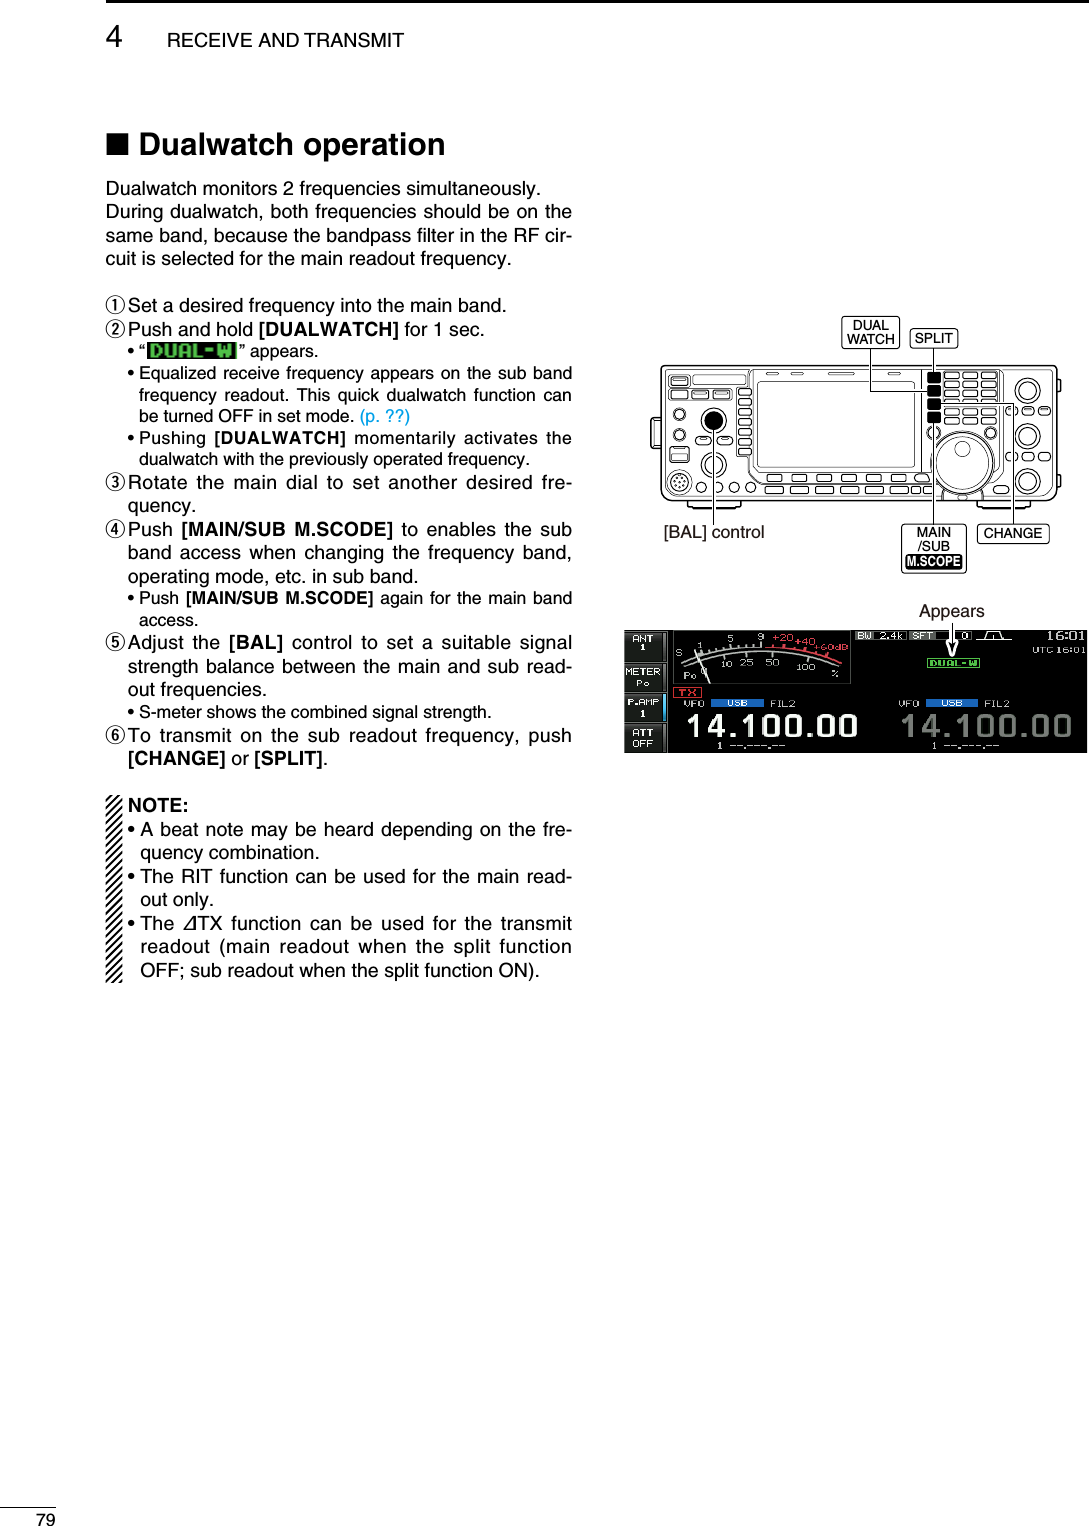 N Dualwatch operationDualwatch monitors 2 frequencies simultaneously.During dualwatch, both frequencies should be on the same band, because the bandpass filter in the RF cir-cuit is selected for the main readout frequency.q Set a desired frequency into the main band.w Push and hold [DUALWATCH] for 1 sec. • “   ” appears. •  Equalized receive frequency appears on the sub band frequency readout. This quick dualwatch function can be turned OFF in set mode. (p. ??) •  Pushing  [DUALWATCH] momentarily activates the dualwatch with the previously operated frequency.e  Rotate the main dial to set another desired fre-quency.r  Push  [MAIN/SUB M.SCODE] to enables the sub band access when changing the frequency band, operating mode, etc. in sub band. •  Push [MAIN/SUB M.SCODE] again for the main band access.t  Adjust the [BAL] control to set a suitable signal strength balance between the main and sub read-out frequencies.  • S-meter shows the combined signal strength.y  To transmit on the sub readout frequency, push [CHANGE] or [SPLIT].NOTE:•  A beat note may be heard depending on the fre-quency combination.•  The RIT function can be used for the main read-out only.•  The  ∂TX function can be used for the transmit readout (main readout when the split function OFF; sub readout when the split function ON).[BAL] controlDUALWATCH SPLITCHANGEMAIN/SUBM.SCOPEM.SCOPEAppears794RECEIVE AND TRANSMIT